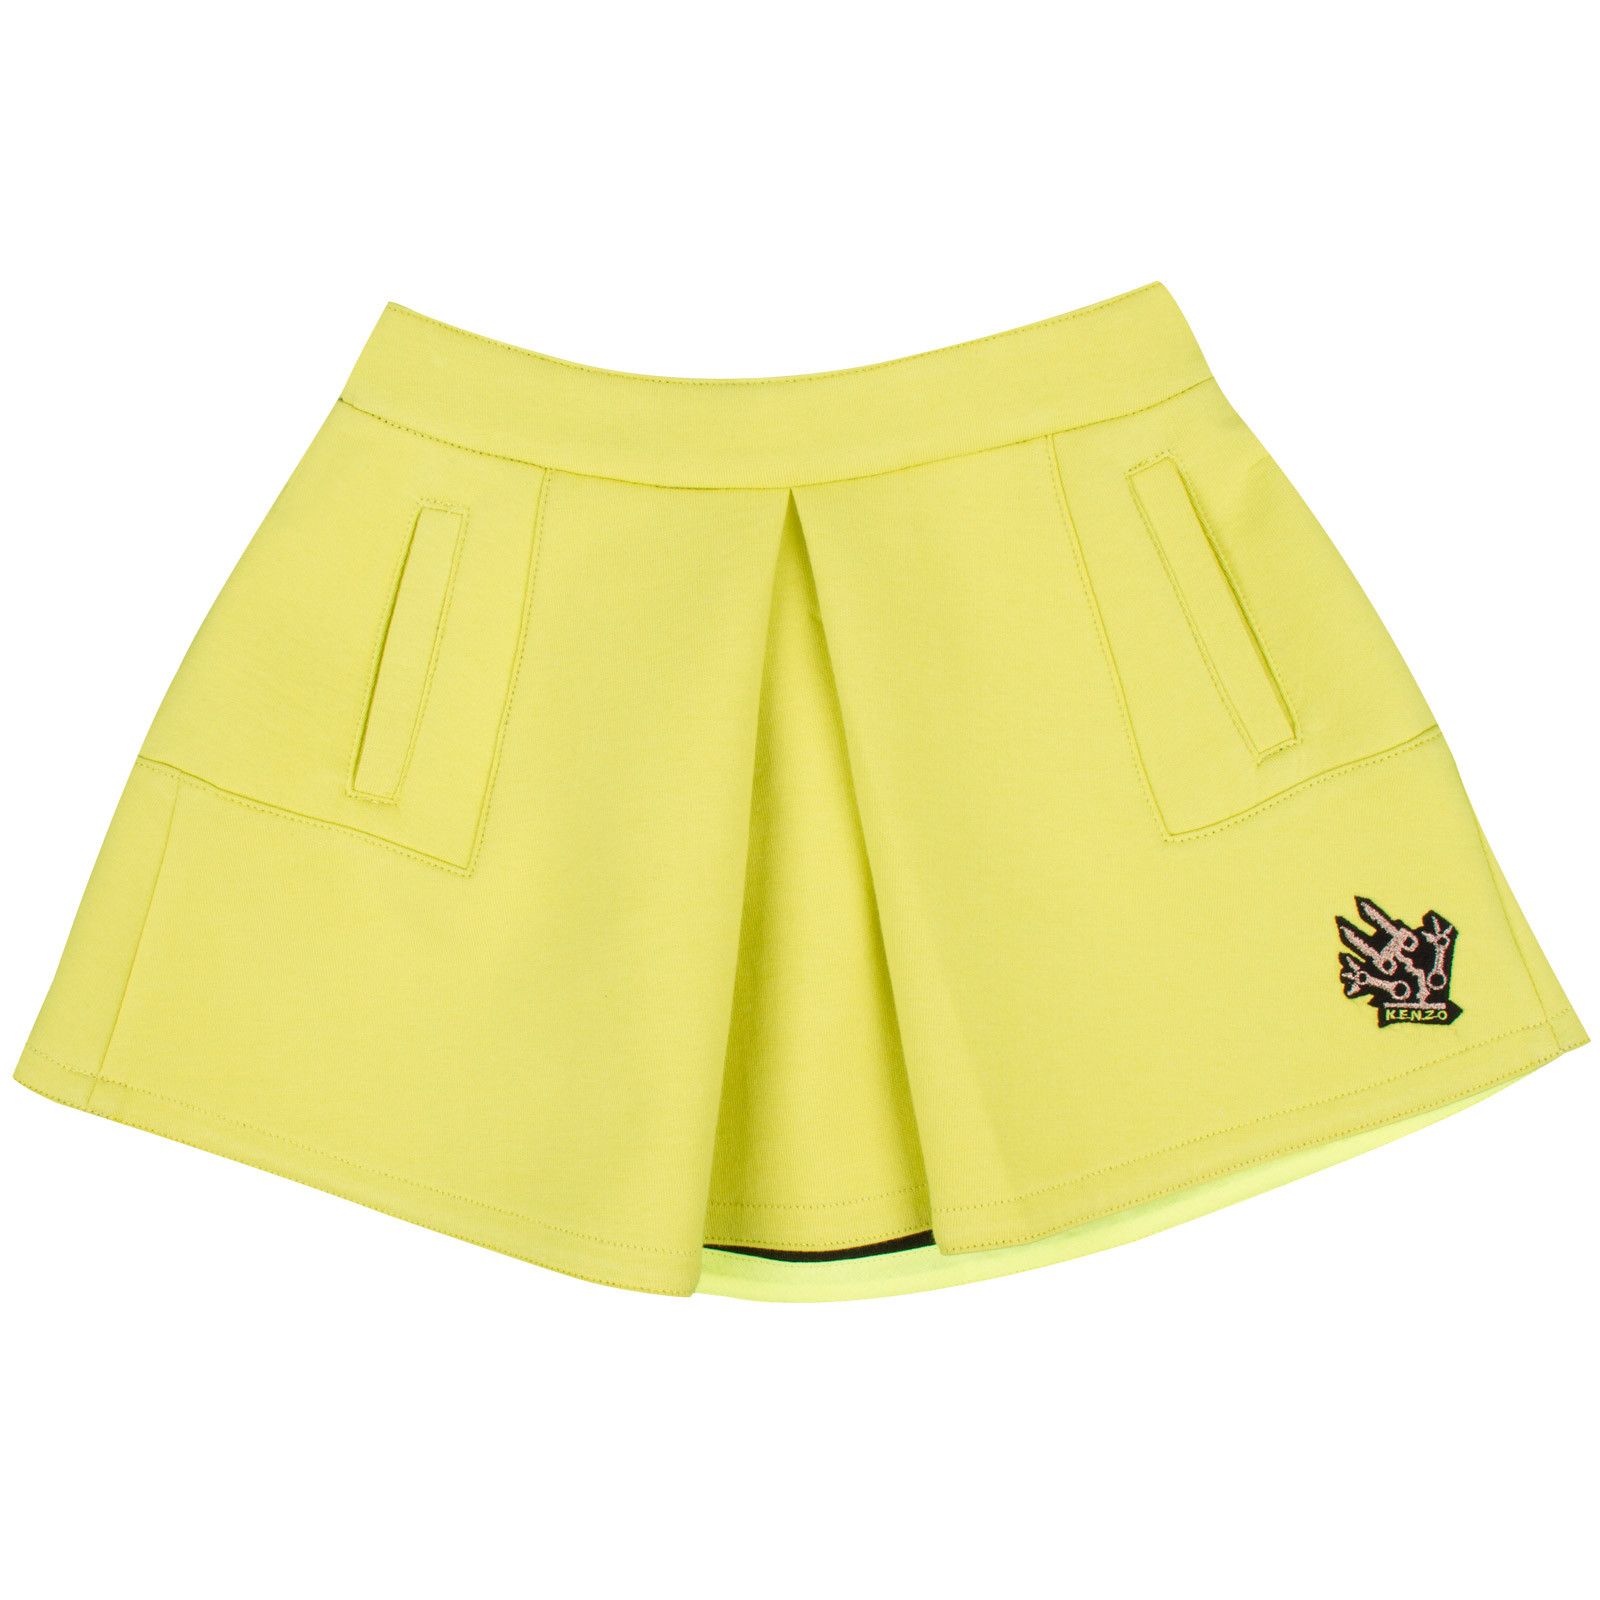 Girls Lime Green Embroidered Logo Skirt With Pockets - CÉMAROSE | Children's Fashion Store - 1